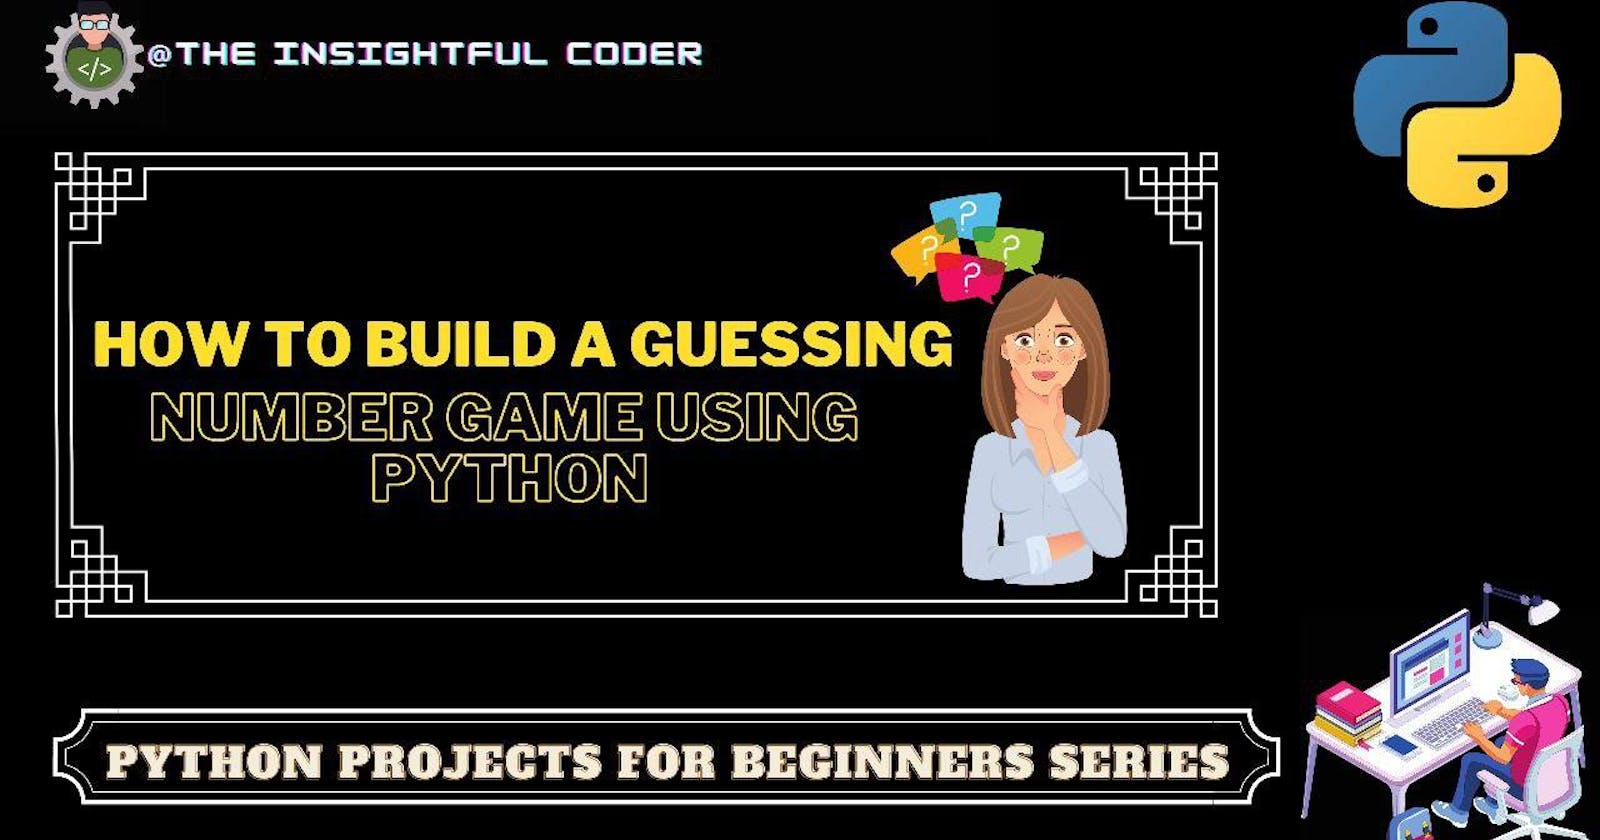 How to Build a Guessing Number Game Using Python